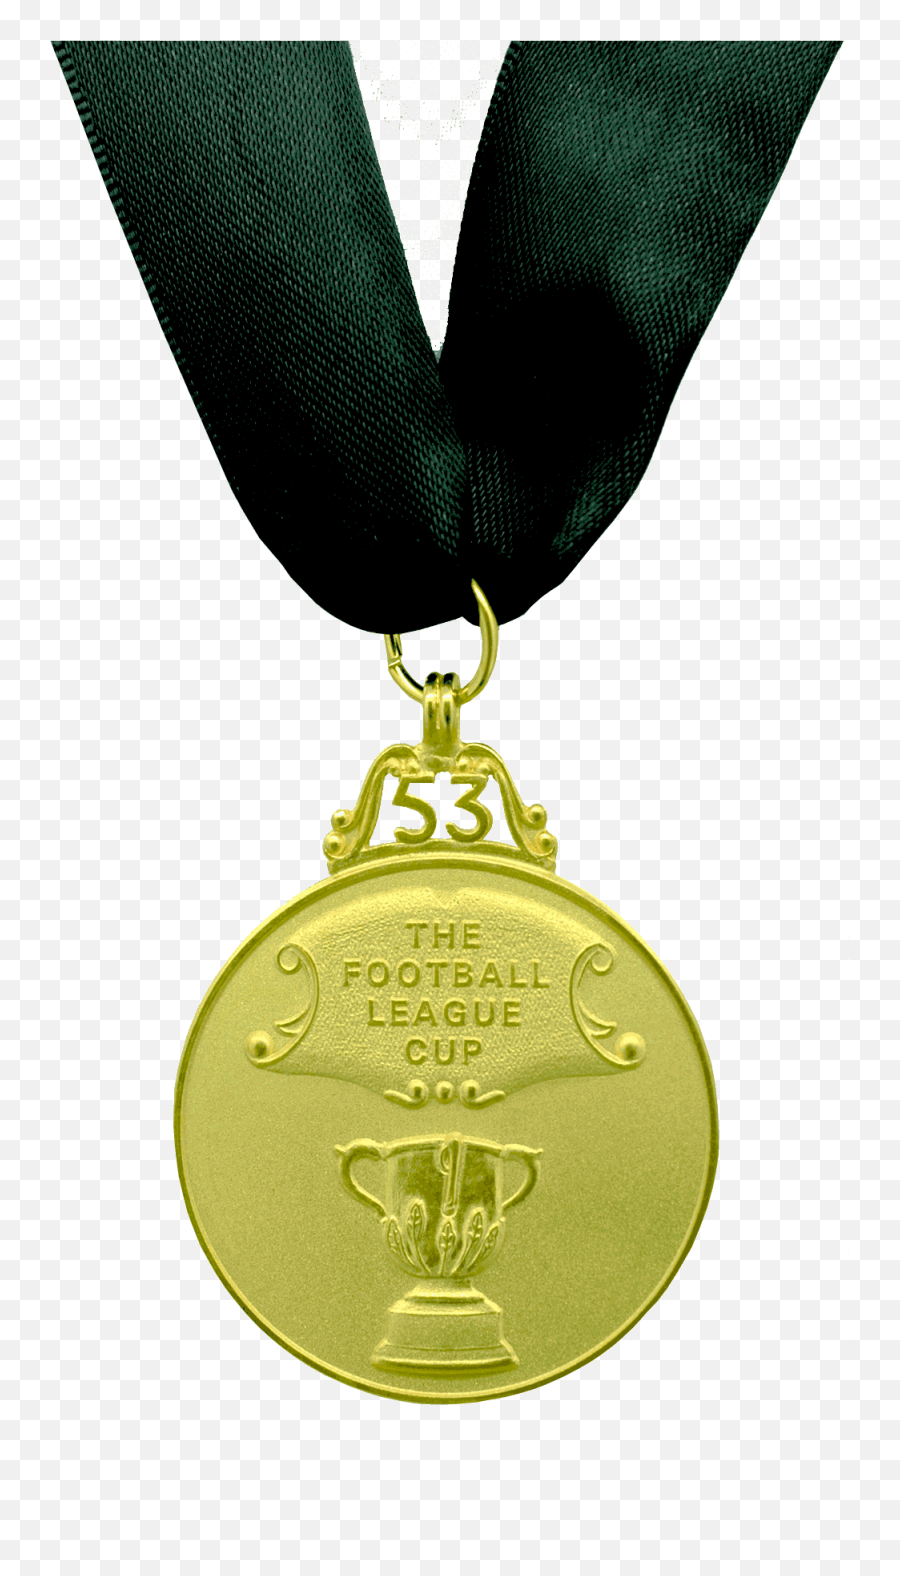 League Cup Medal 53 - Football League Cup Medal Clipart Solid Emoji,Emoji For The Green Hornet